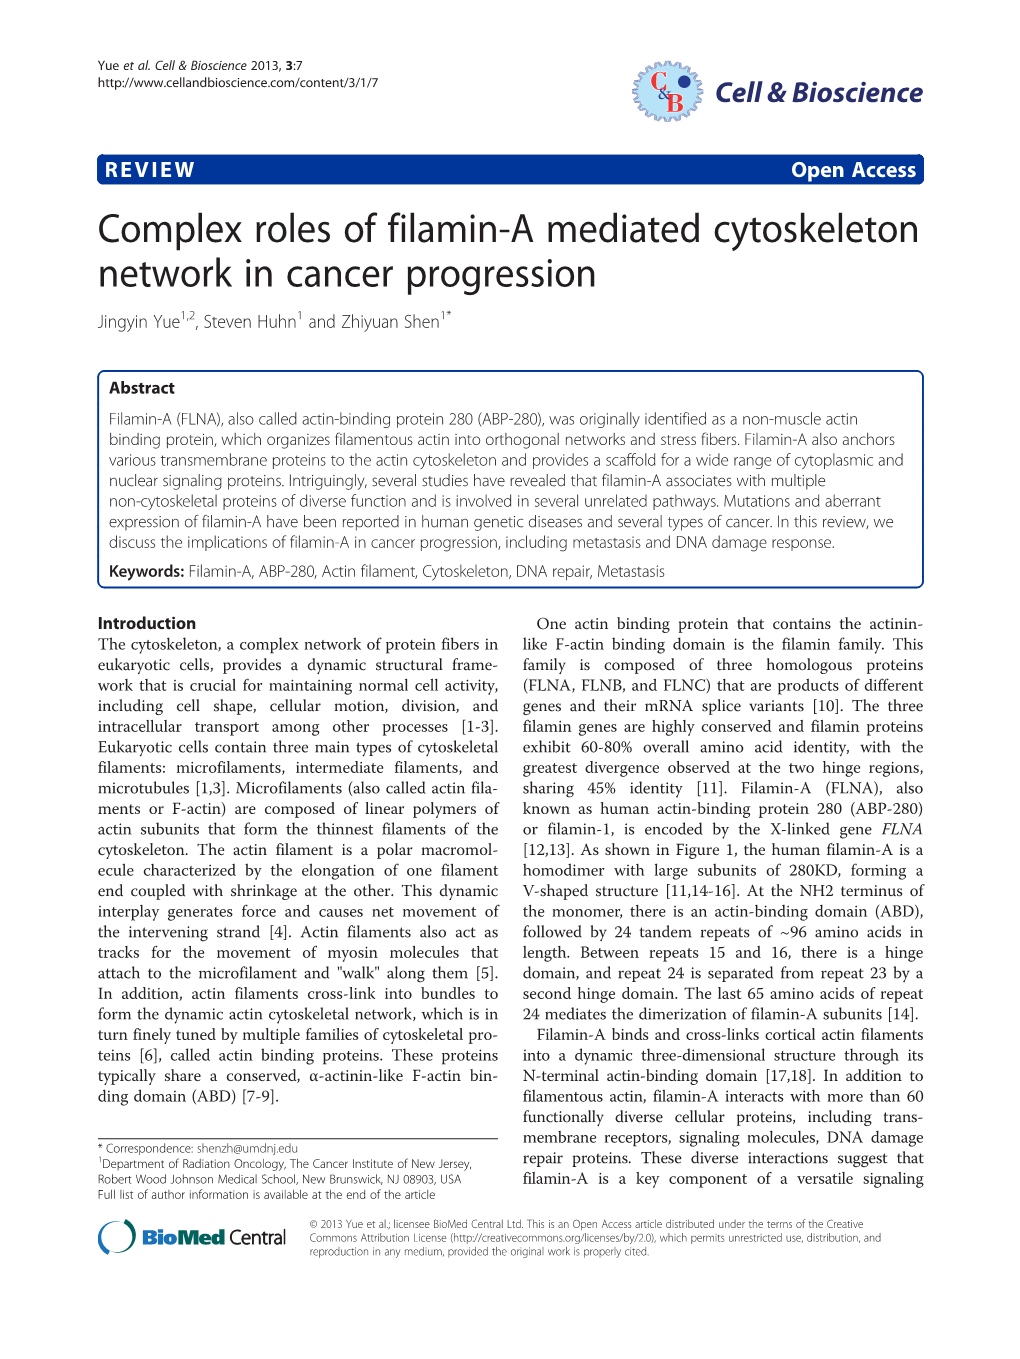 Complex Roles of Filamin-A Mediated Cytoskeleton Network in Cancer Progression Jingyin Yue1,2, Steven Huhn1 and Zhiyuan Shen1*